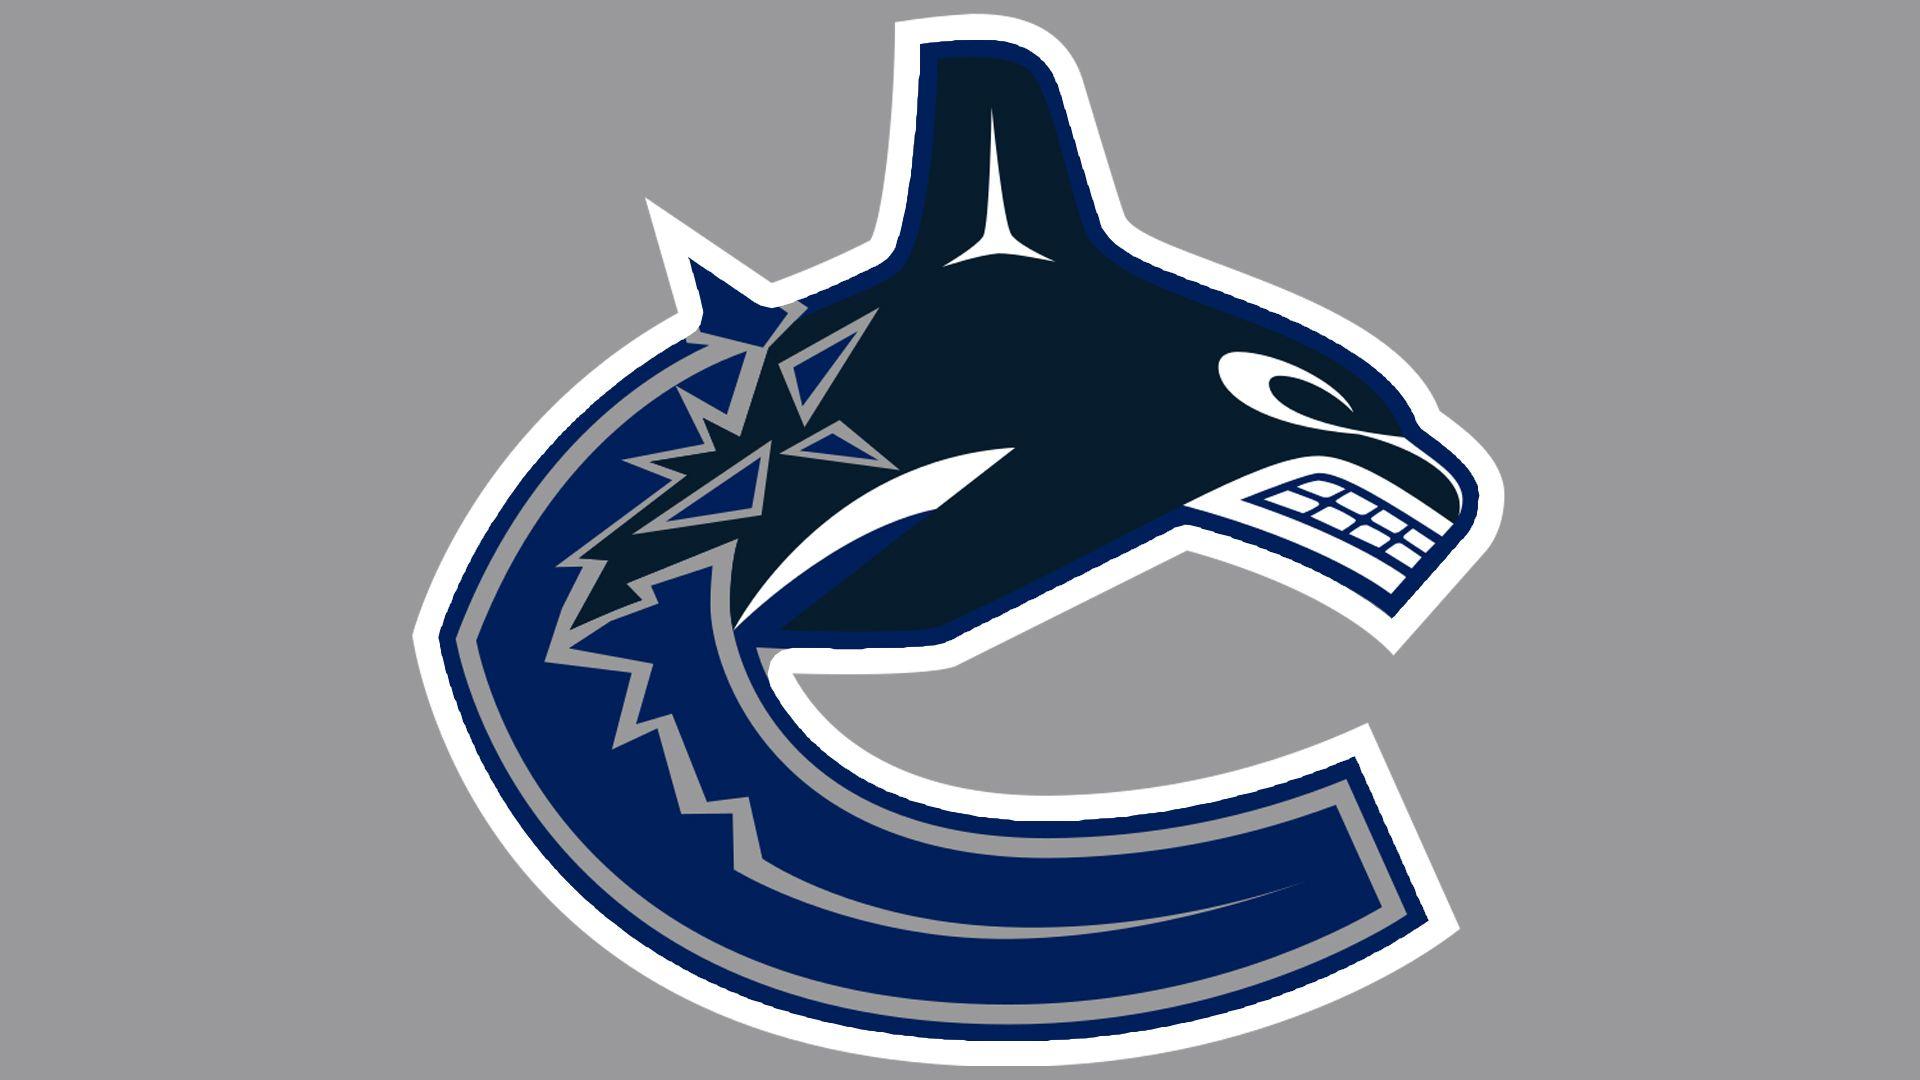 Canucks Logo - Vancouver Canucks Logo, Vancouver Canucks Symbol, Meaning, History